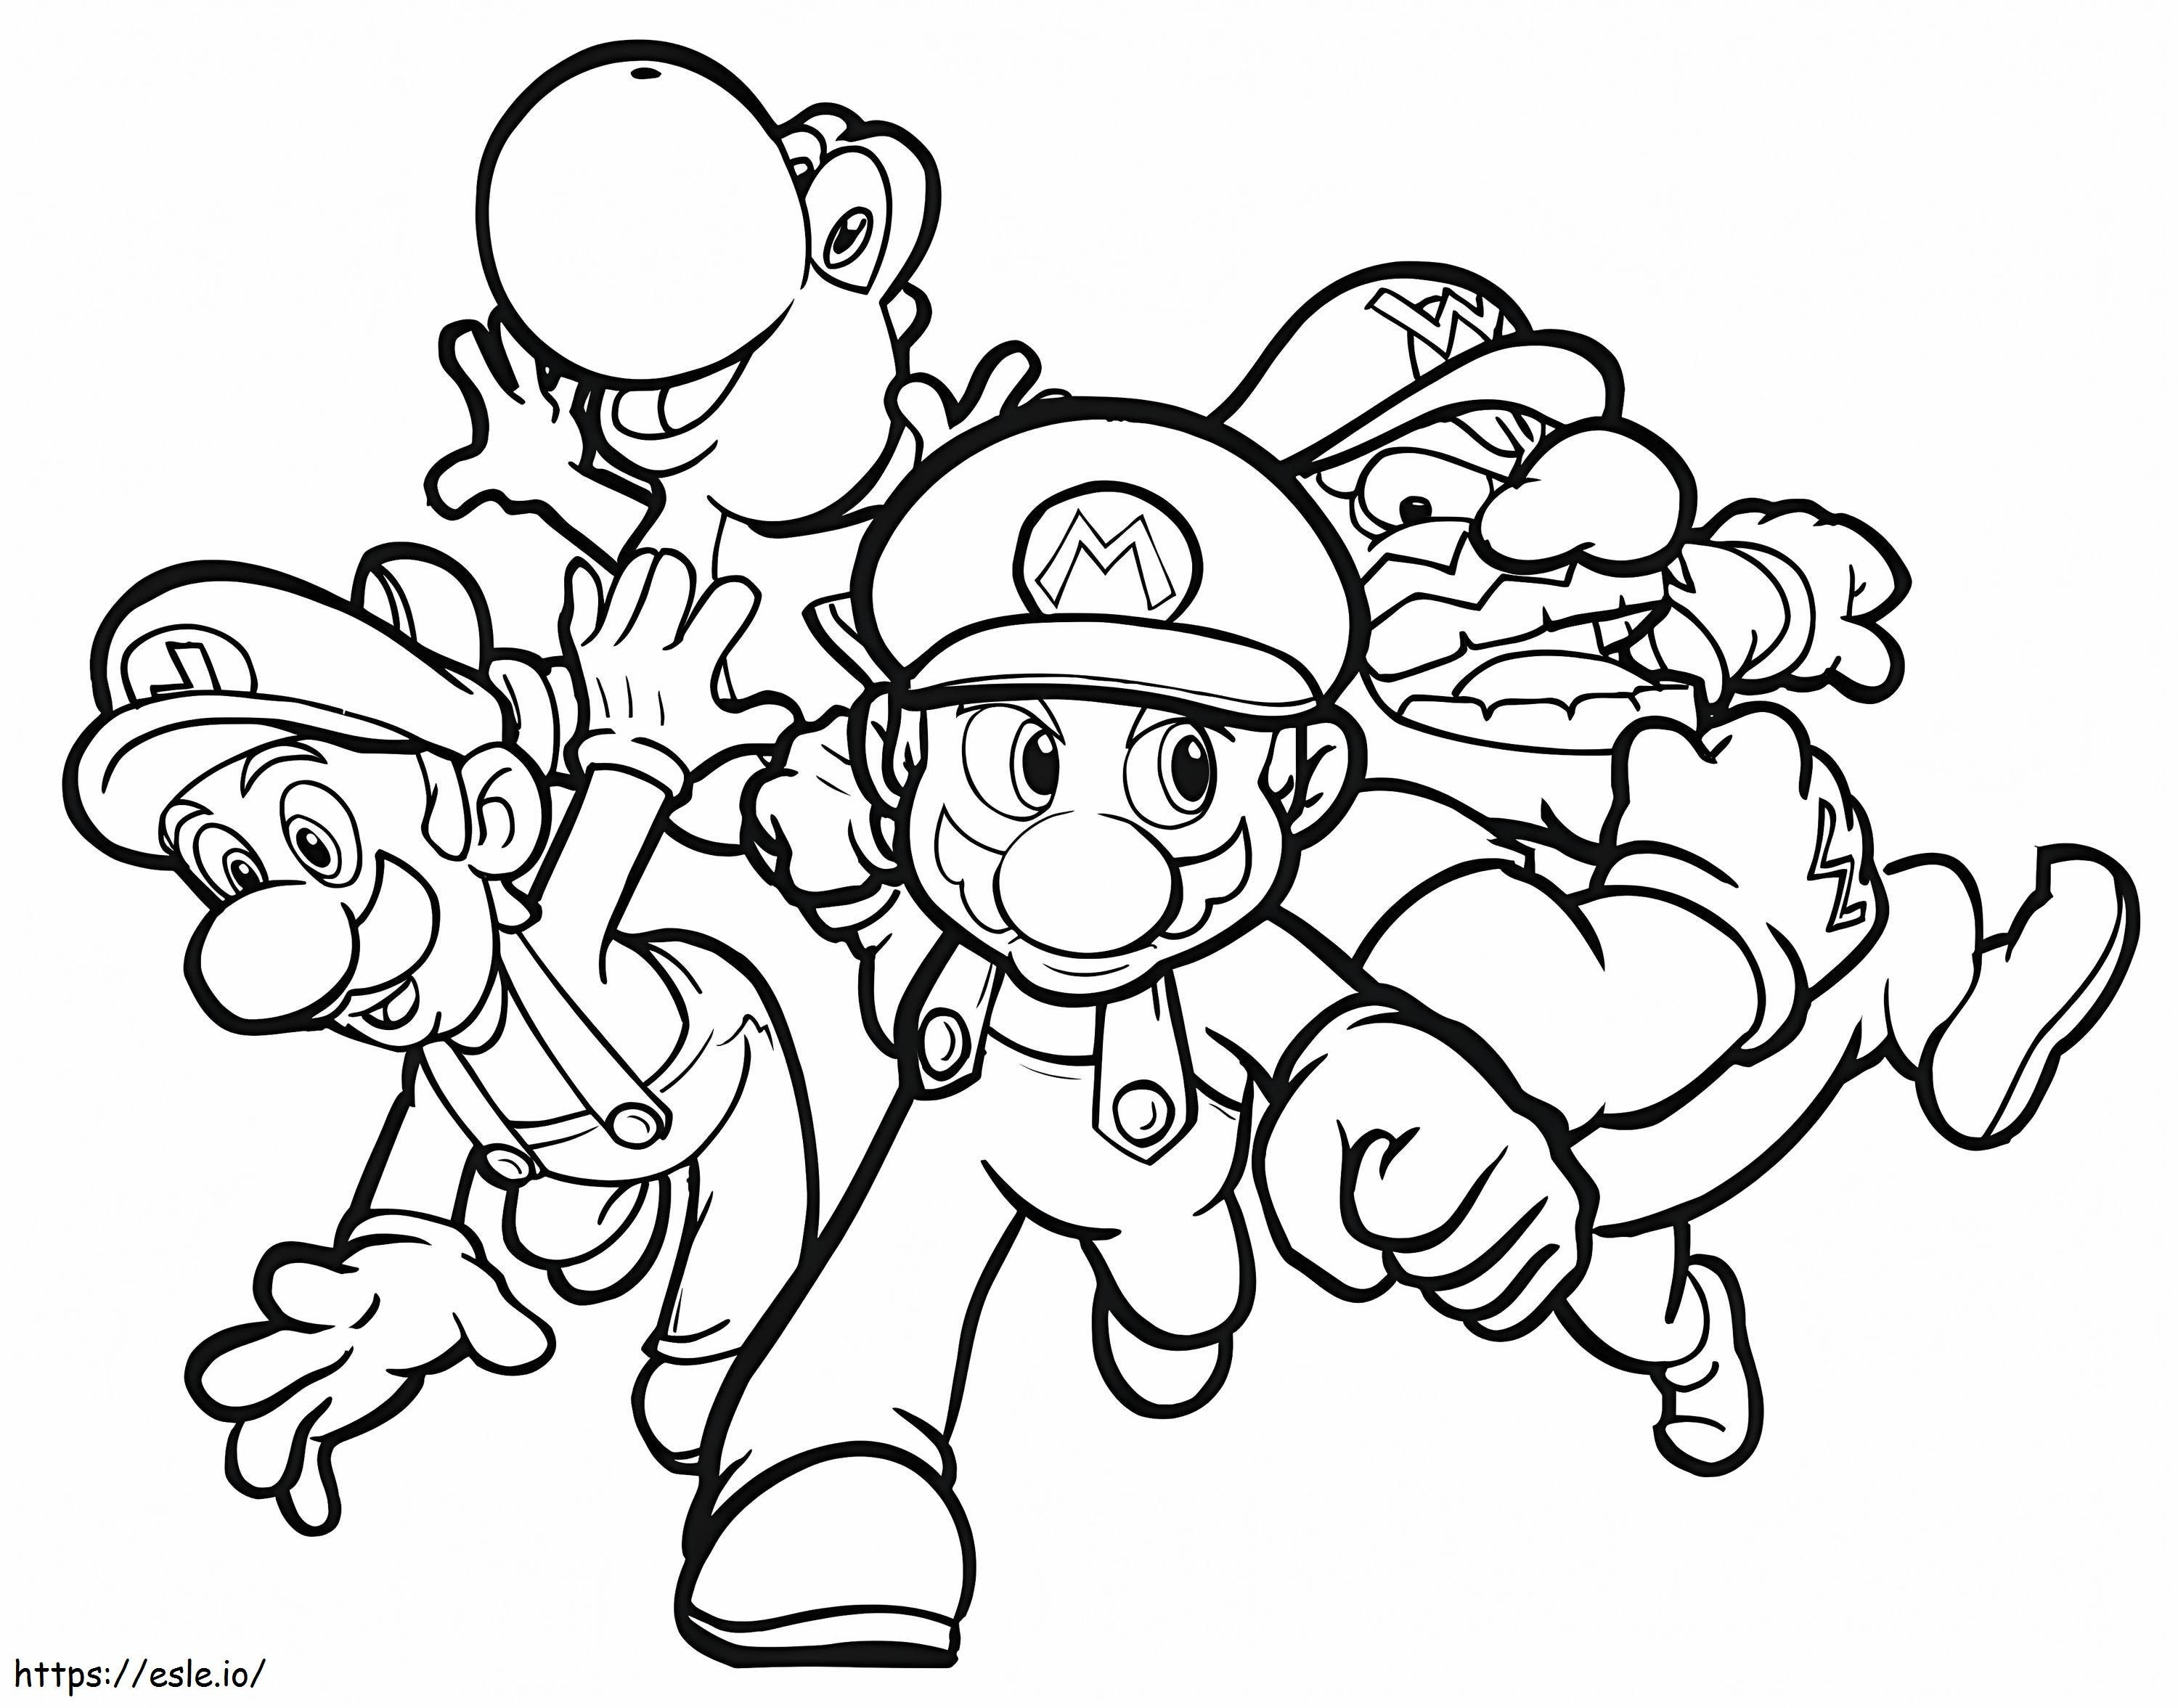 Characters From Mario 1 coloring page